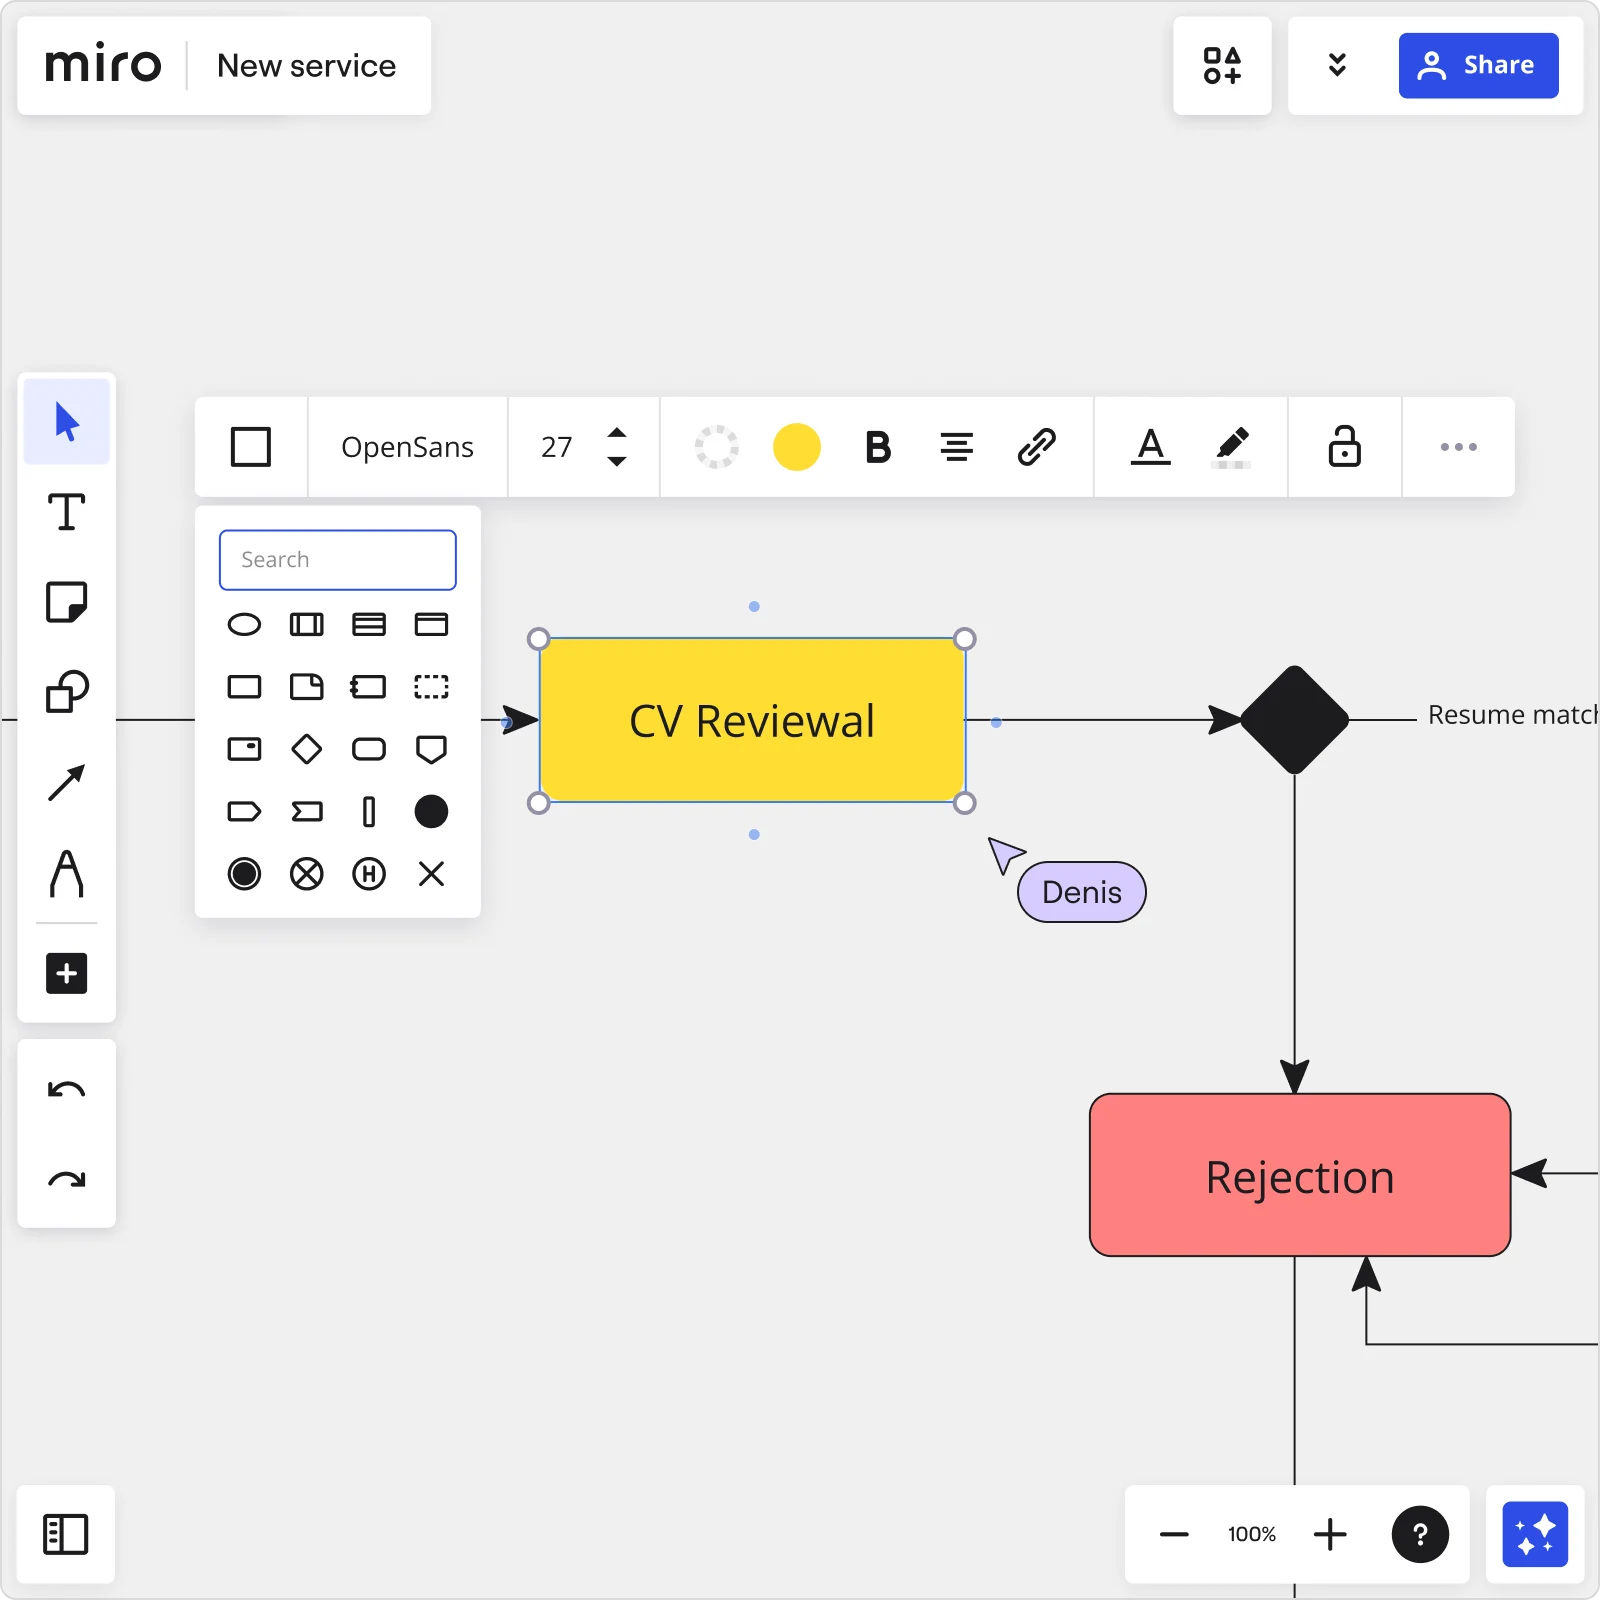 An image showing how to create an activity diagram online in Miro